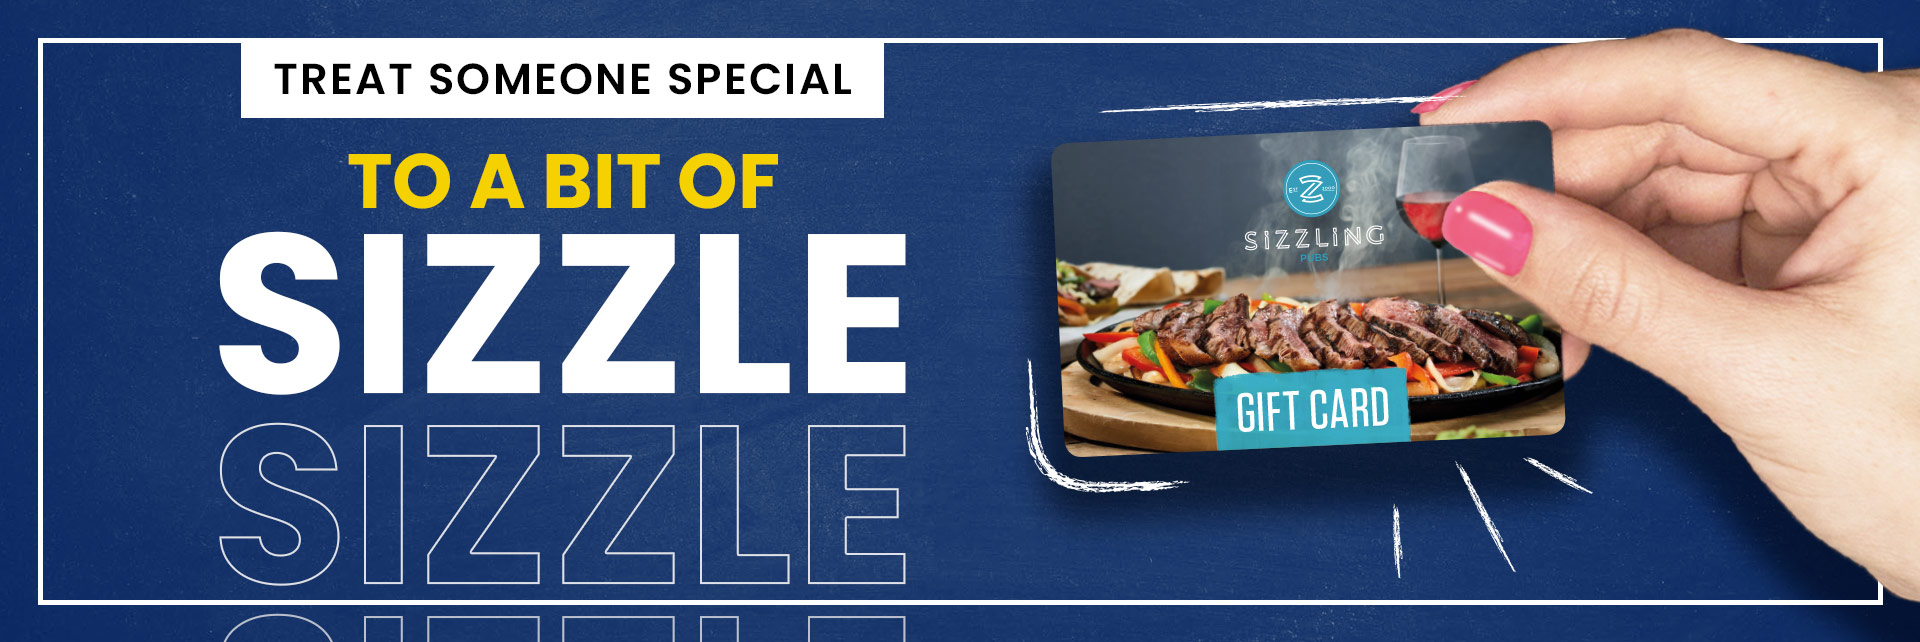 Sizzling Pubs Gift Card at Manor Farm in Kingston Upon Hull